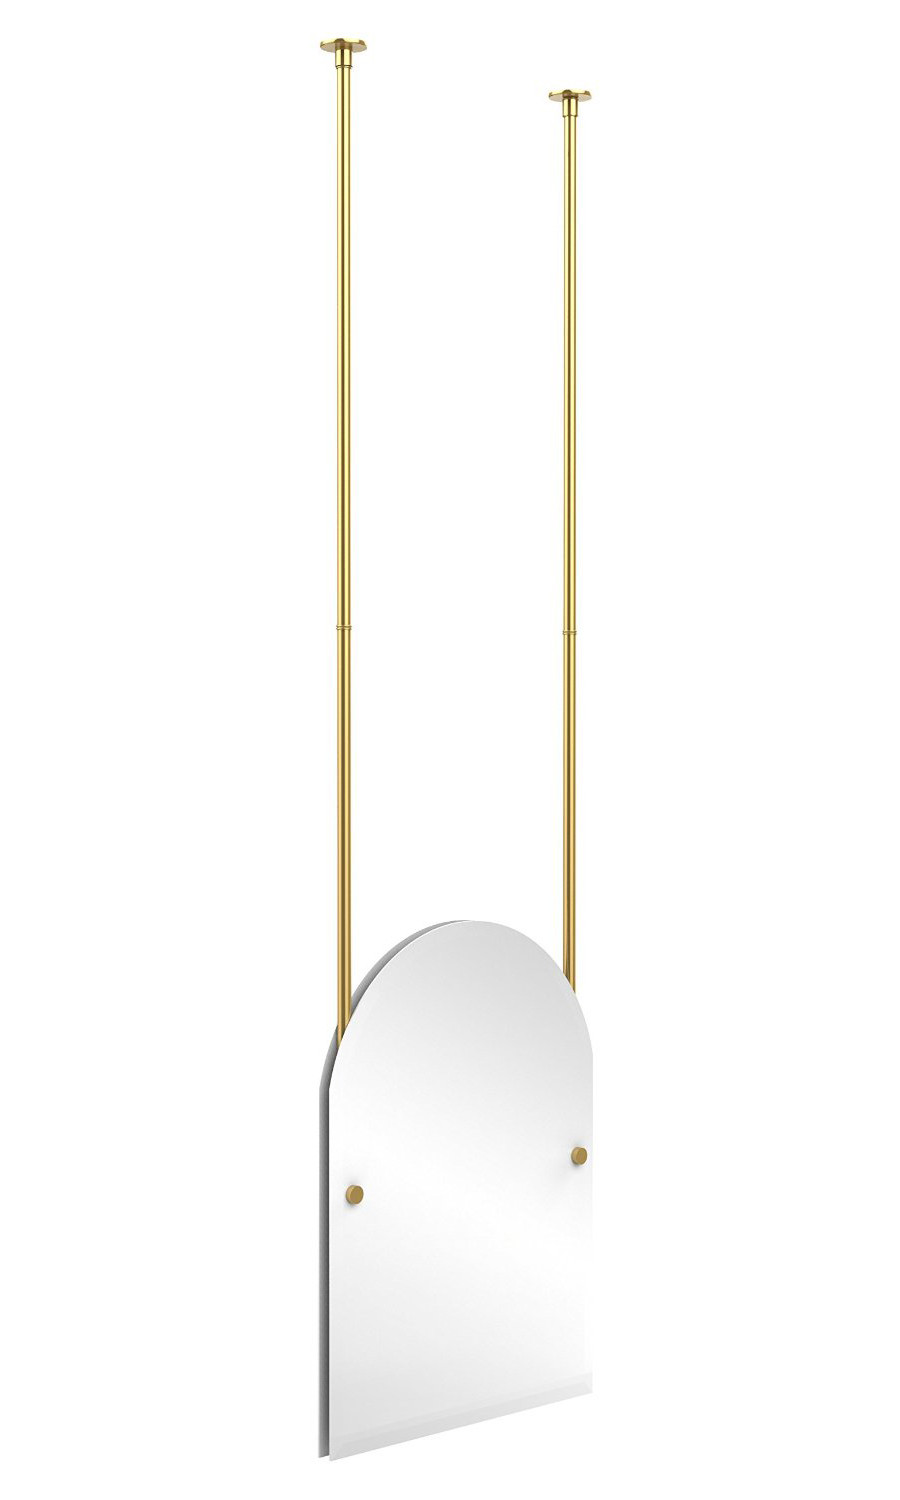 Allied Brass CH-94-PB Arched Top Ceiling-hung Mirror in Polished Brass